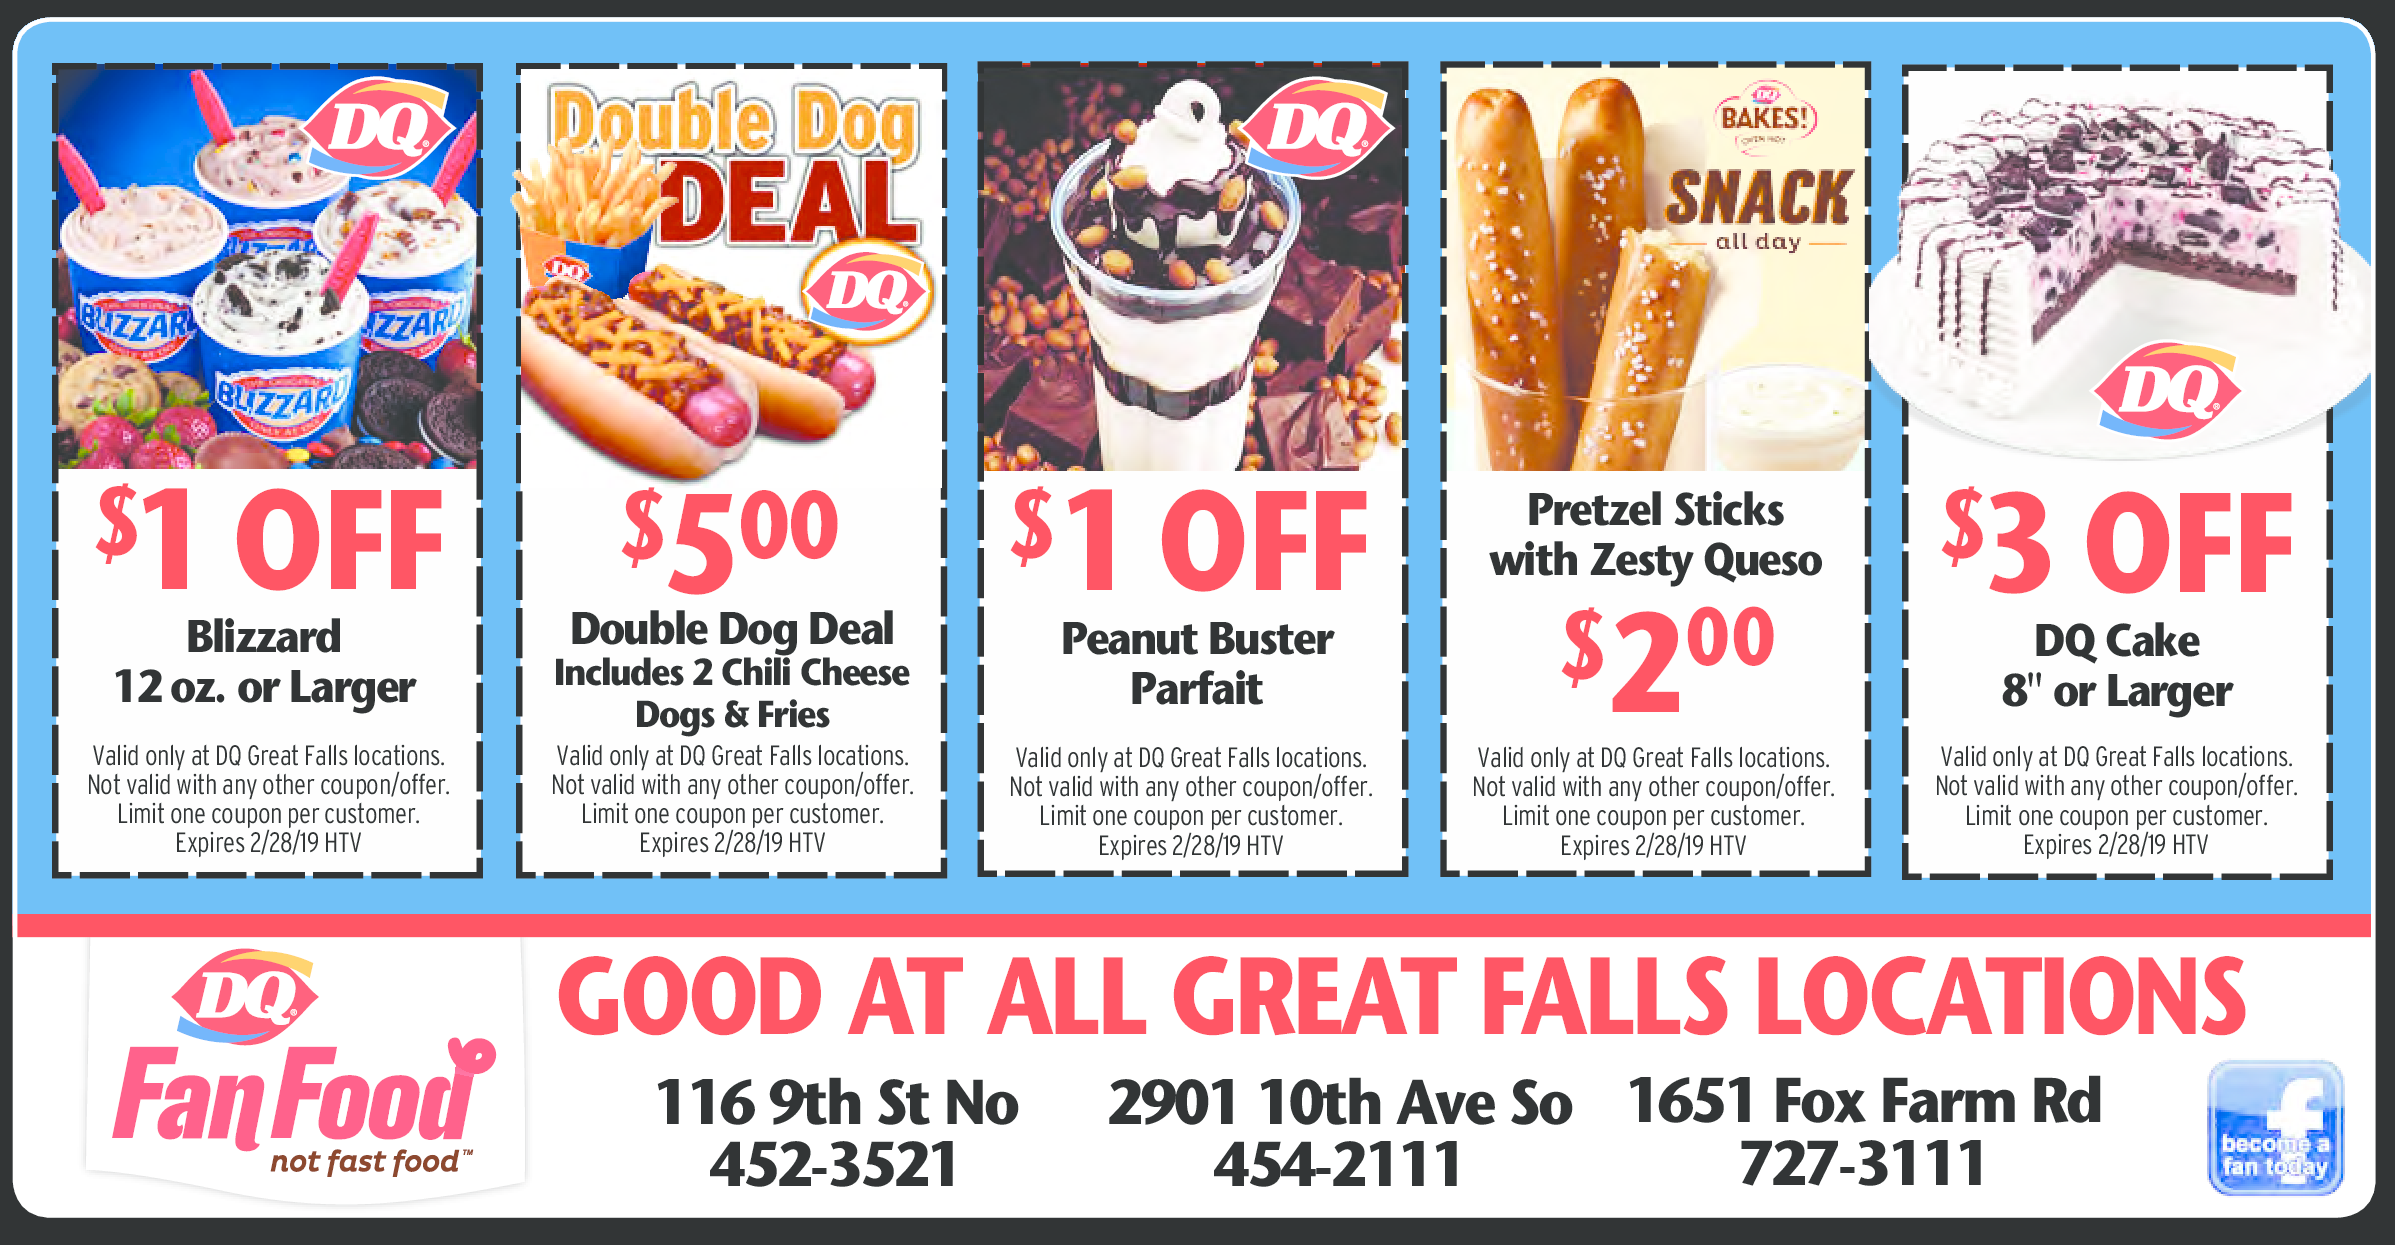 the-best-printable-dq-coupons-tristan-website